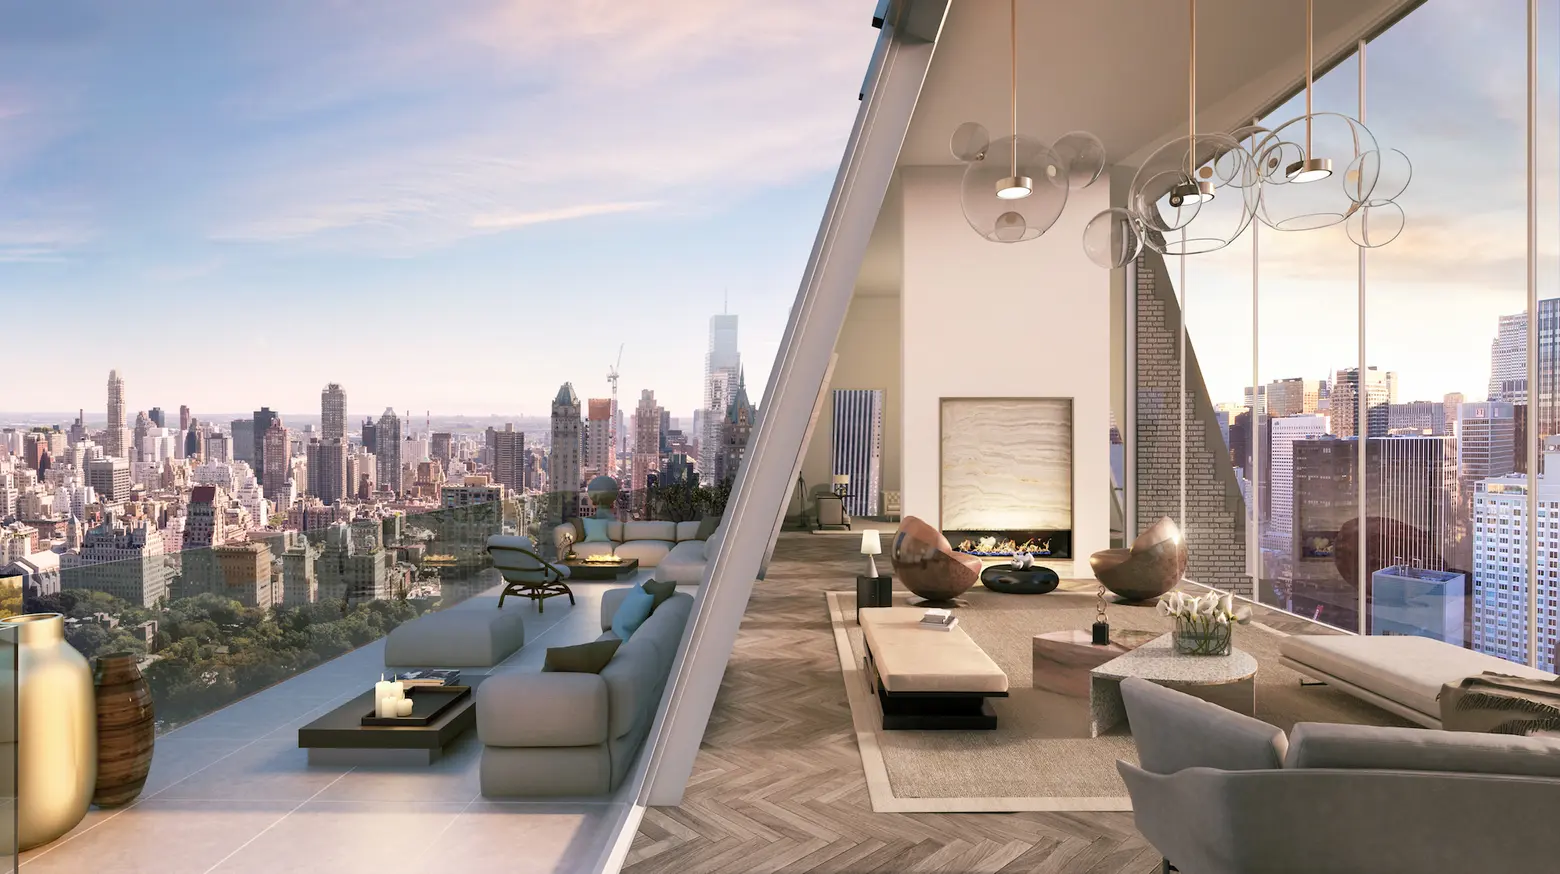 Penthouse inside historic Central Park South tower’s copper roof to be auctioned off